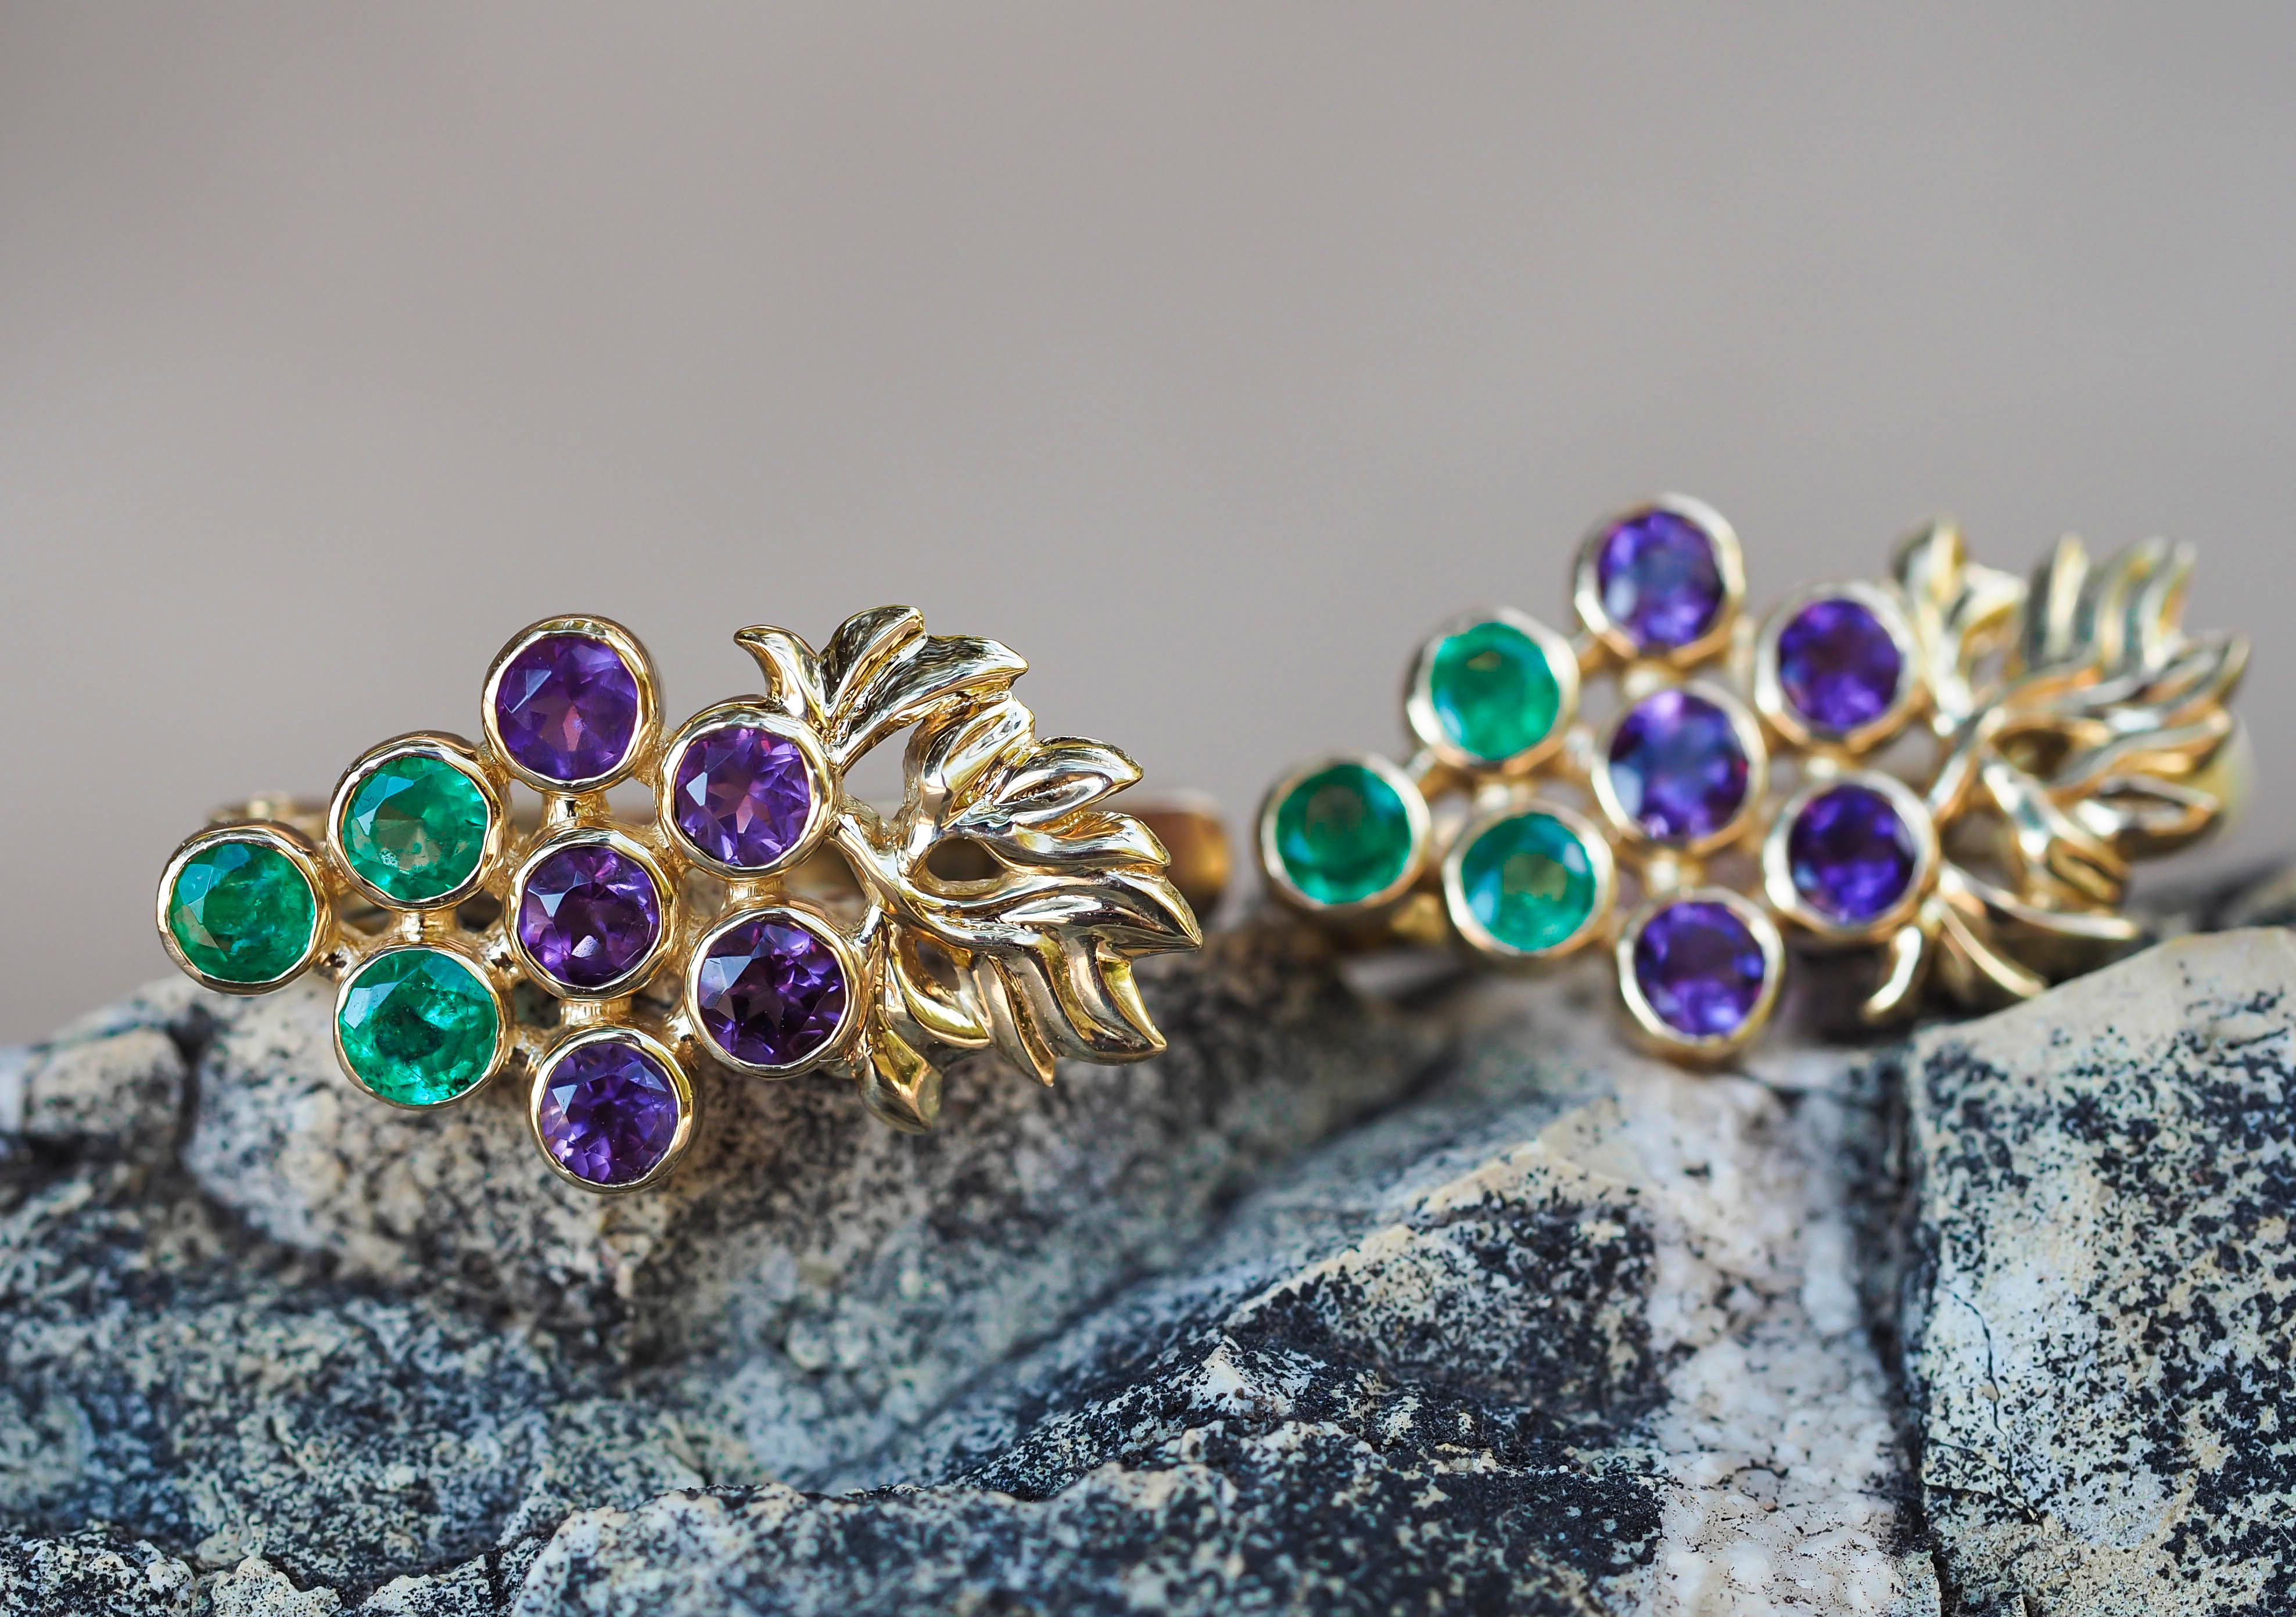 14k Gold Grape Earrings with Emeralds and Amethysts For Sale 8